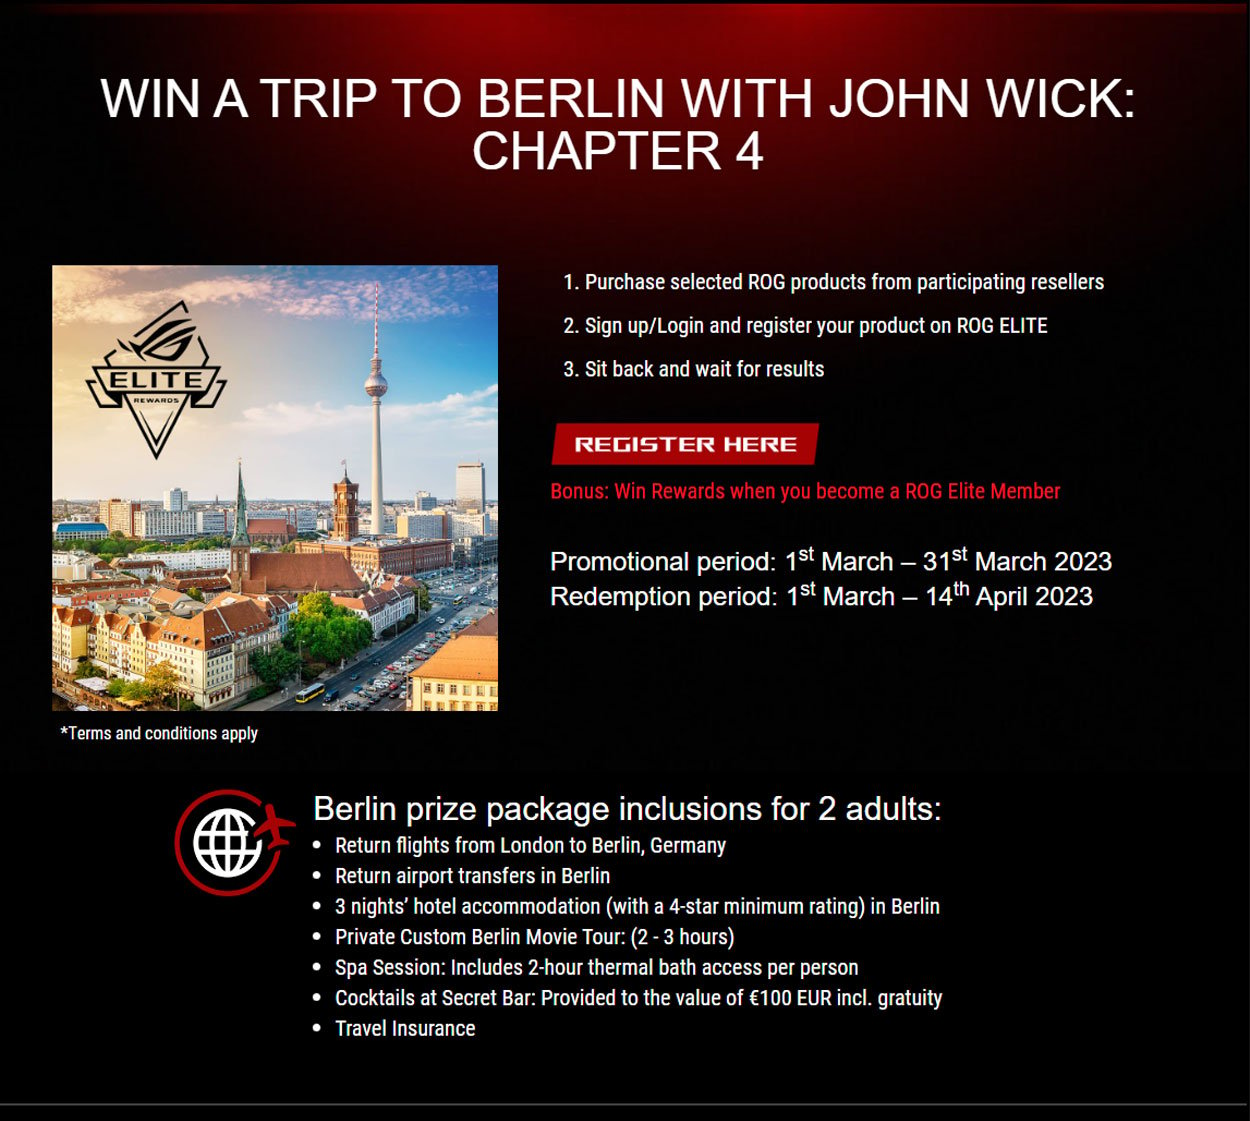 Win a trip to Berlin with John Wick CHapter 4 when you purchase ASUS ROG. Click here to register your purchase. Promotional period 1st March - 31st March 2023, Redemption period 1st March - 14th April 2023. Berlin prize package inclusions for 2 adults: Return flights from London to Berlin, Germany. Return airport transfers in Berlin. 3 nights' hotel accomodation in Berlin (4-star minimum rating). Private custom Berlin movie tour (2-3 hours), Spa session with 2 hour thermal bath access per person. Cocktails at Secret Bar to the value of 100 euros incl. gratuity. Travel insurance.